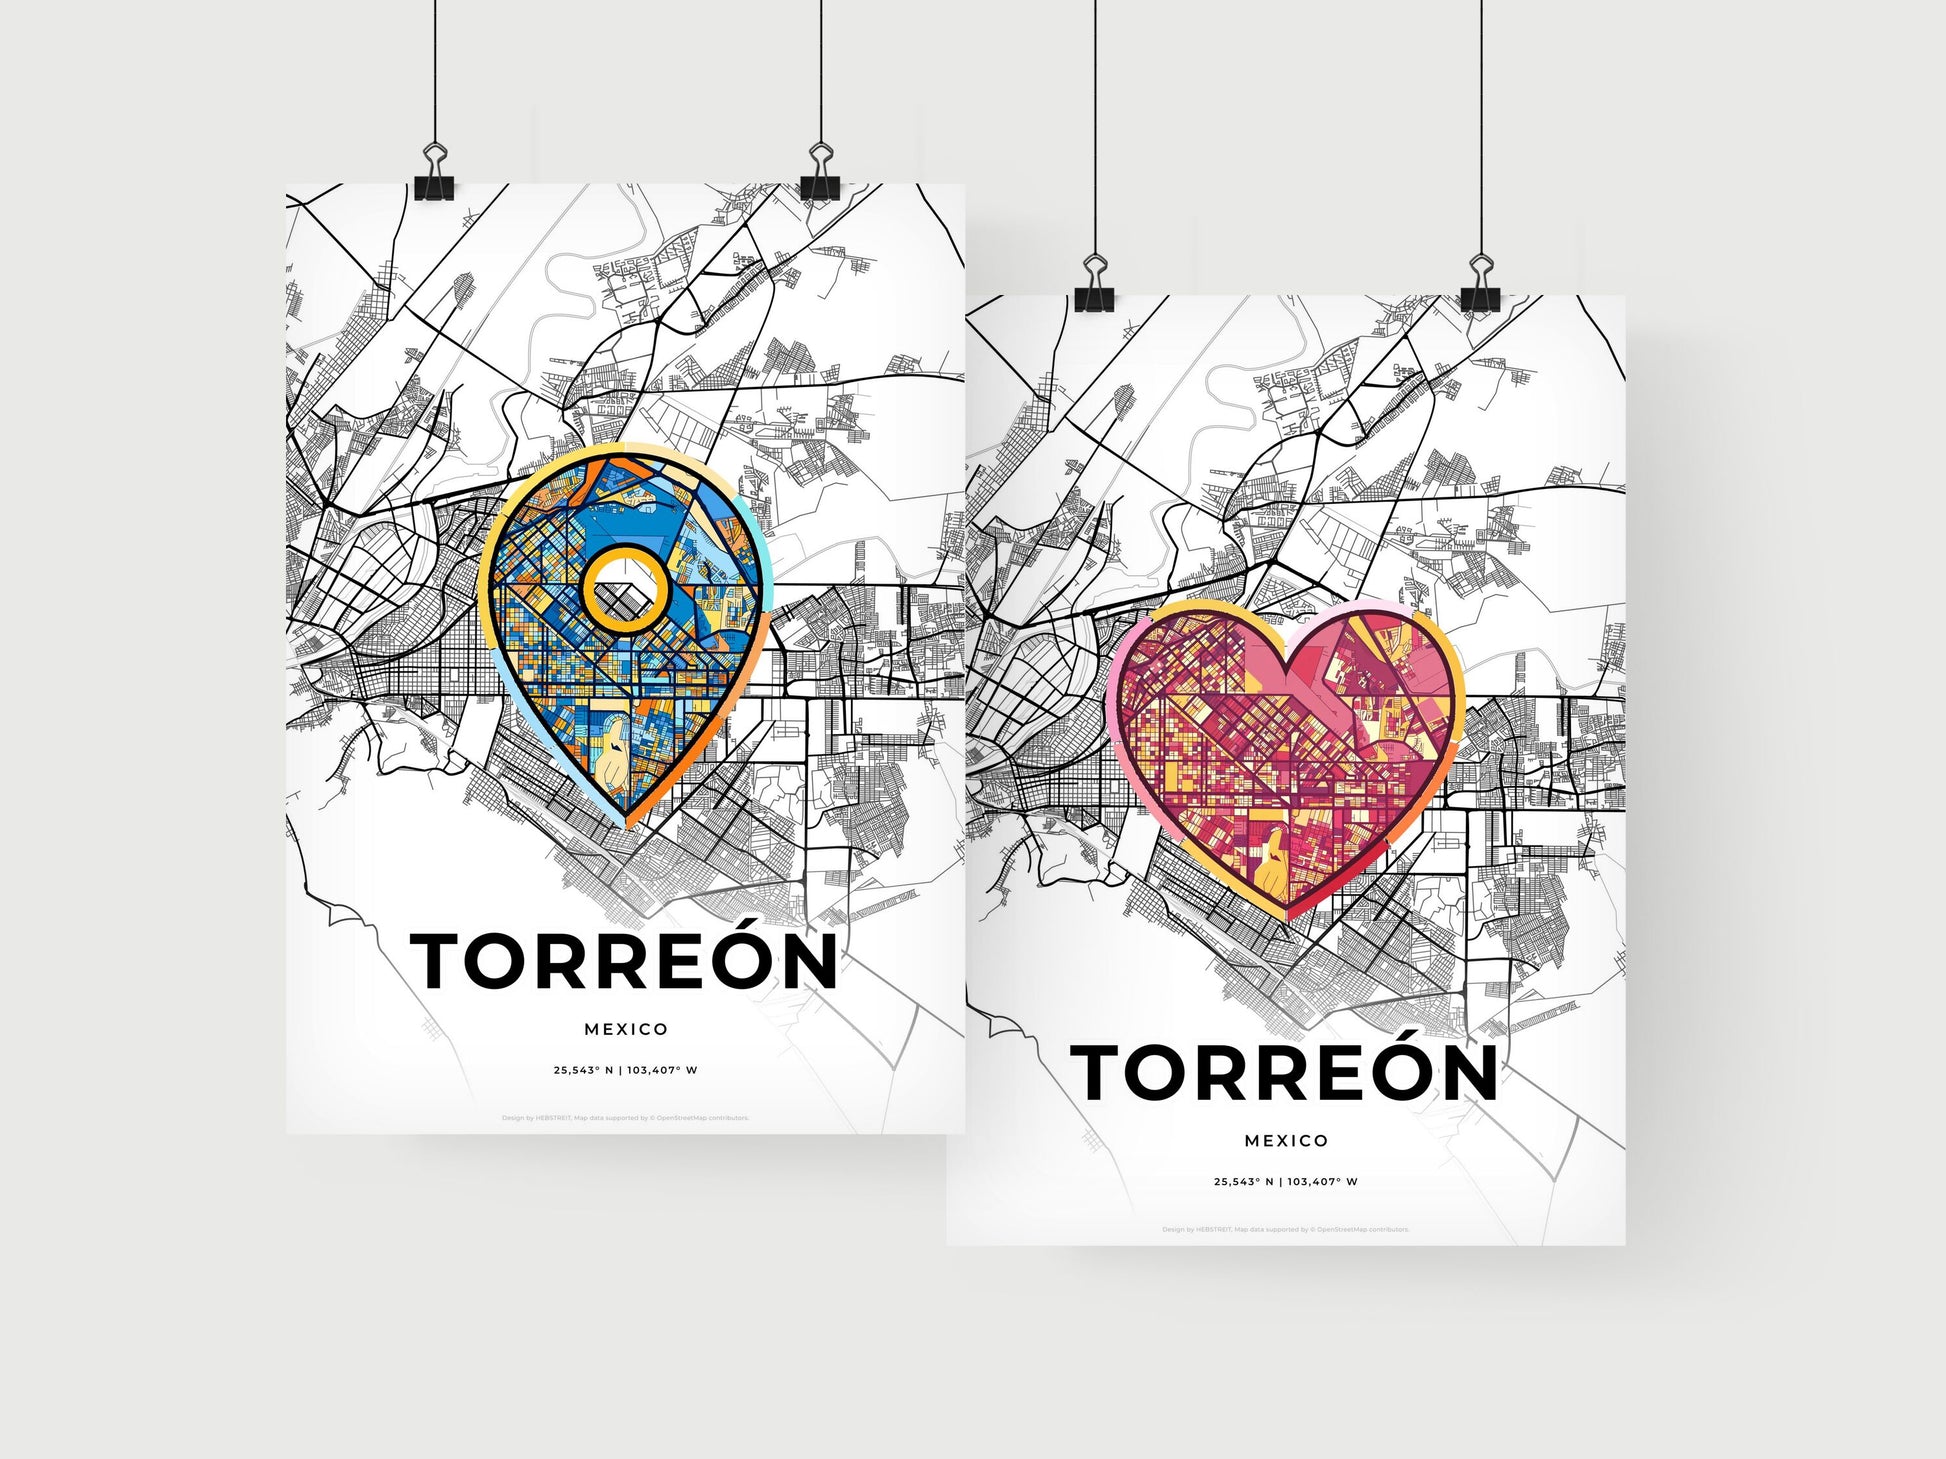 TORREÓN MEXICO minimal art map with a colorful icon.